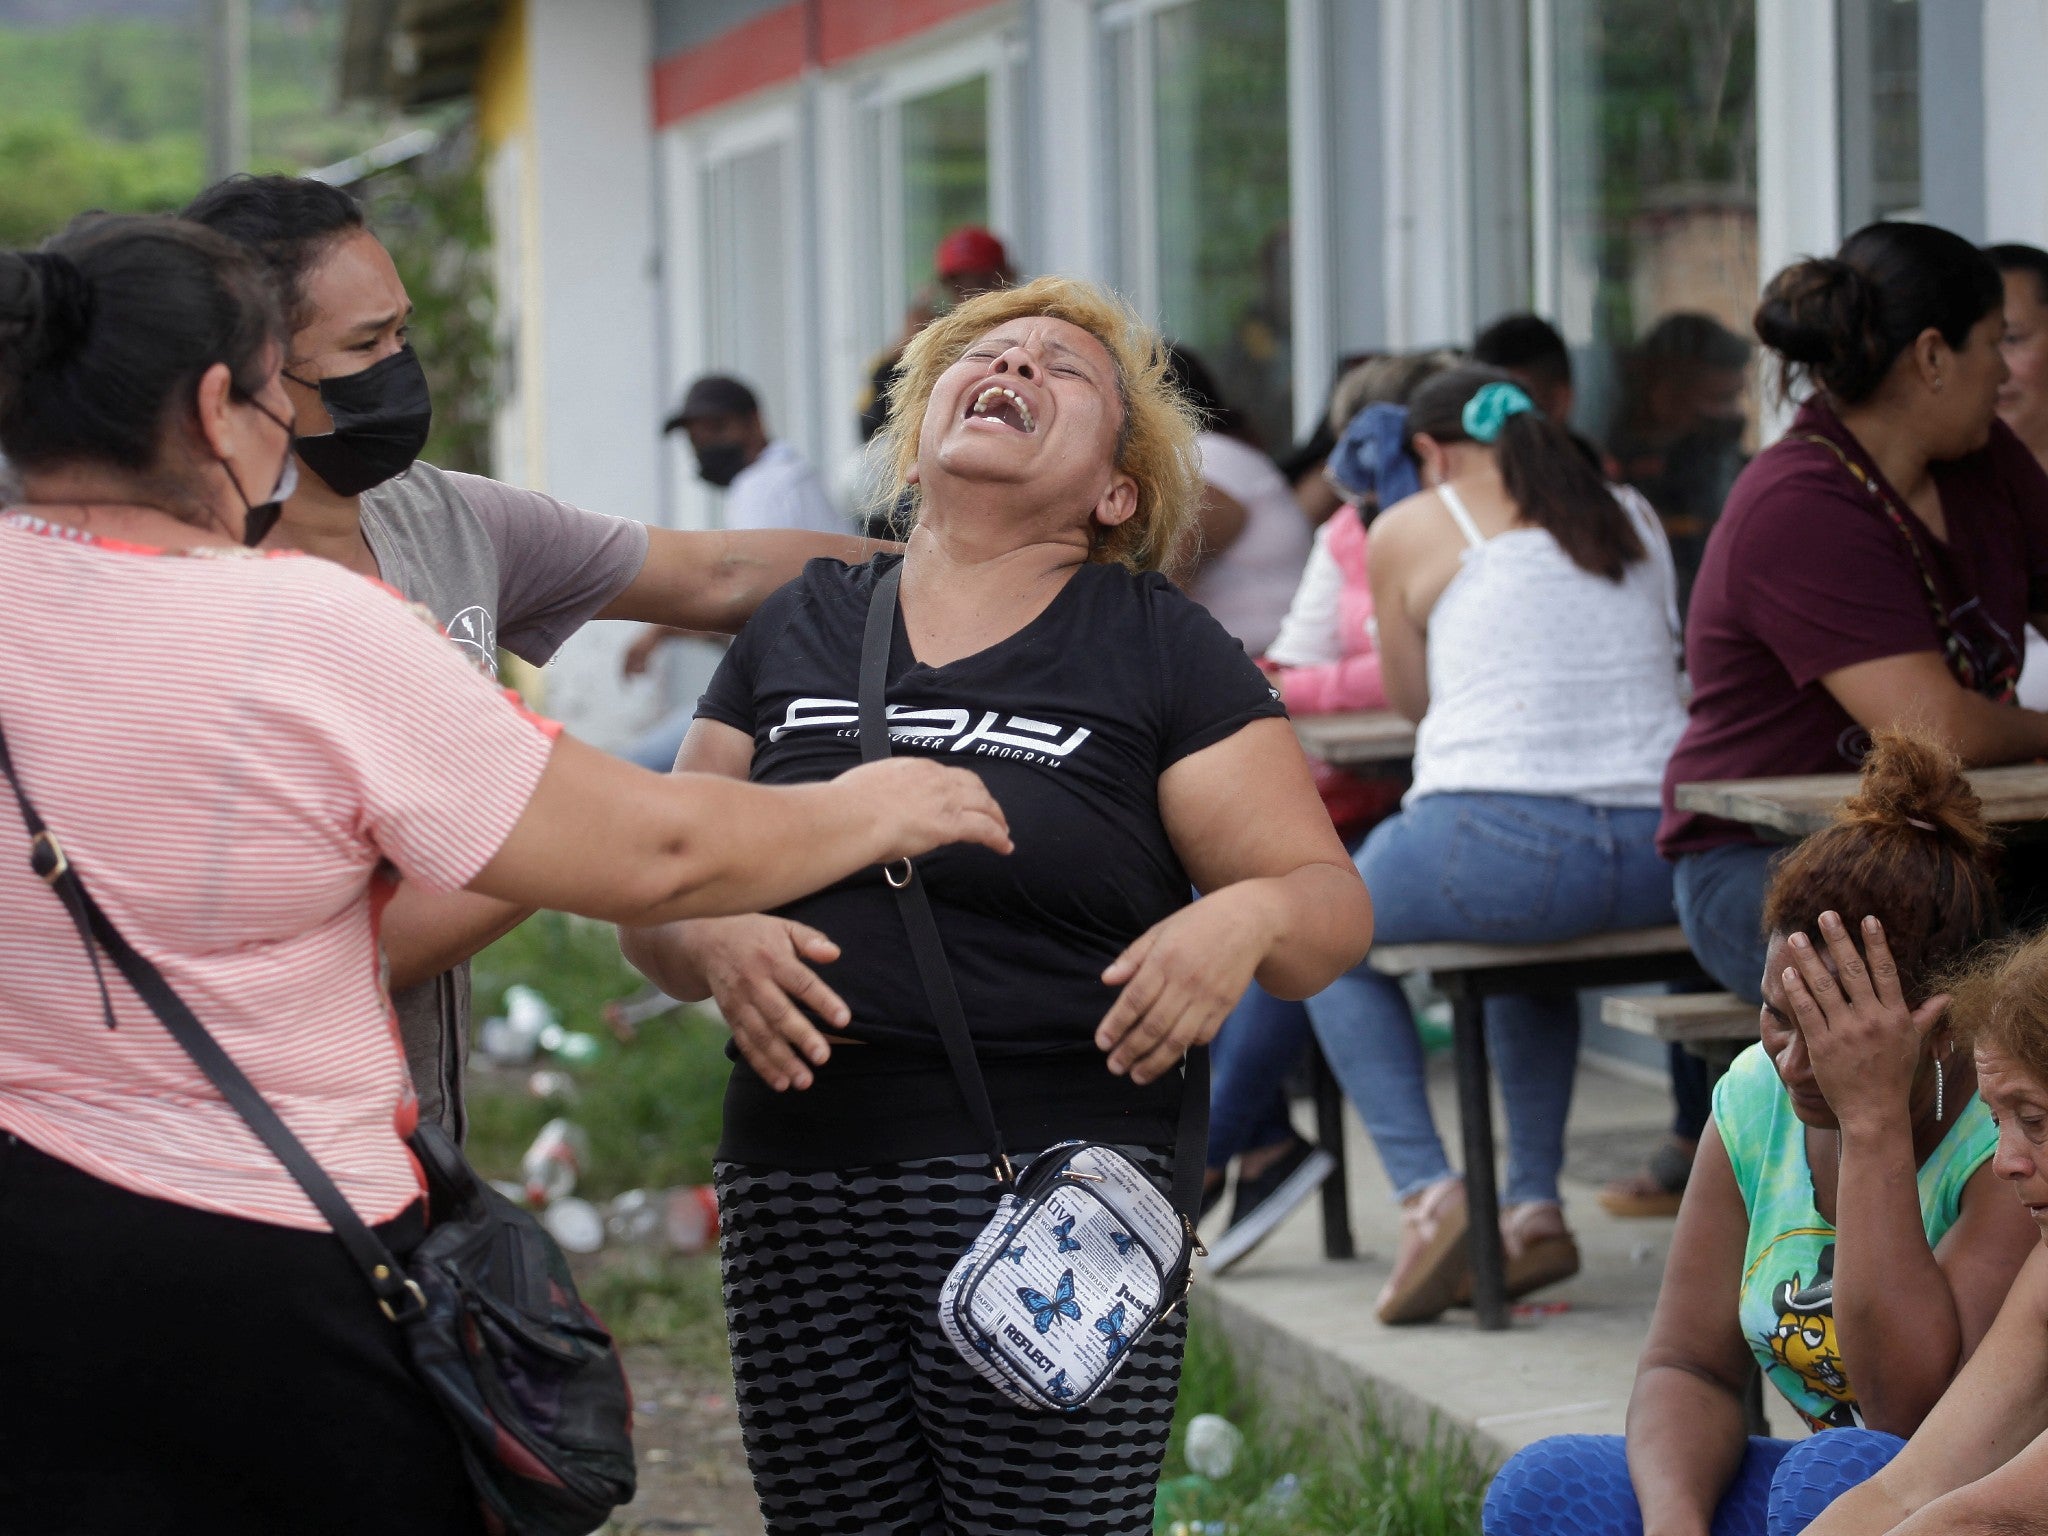 The relative of an inmate cries as others comfort her as they wait for news about their loved ones outside the women’s prison that is the site of the latest riot